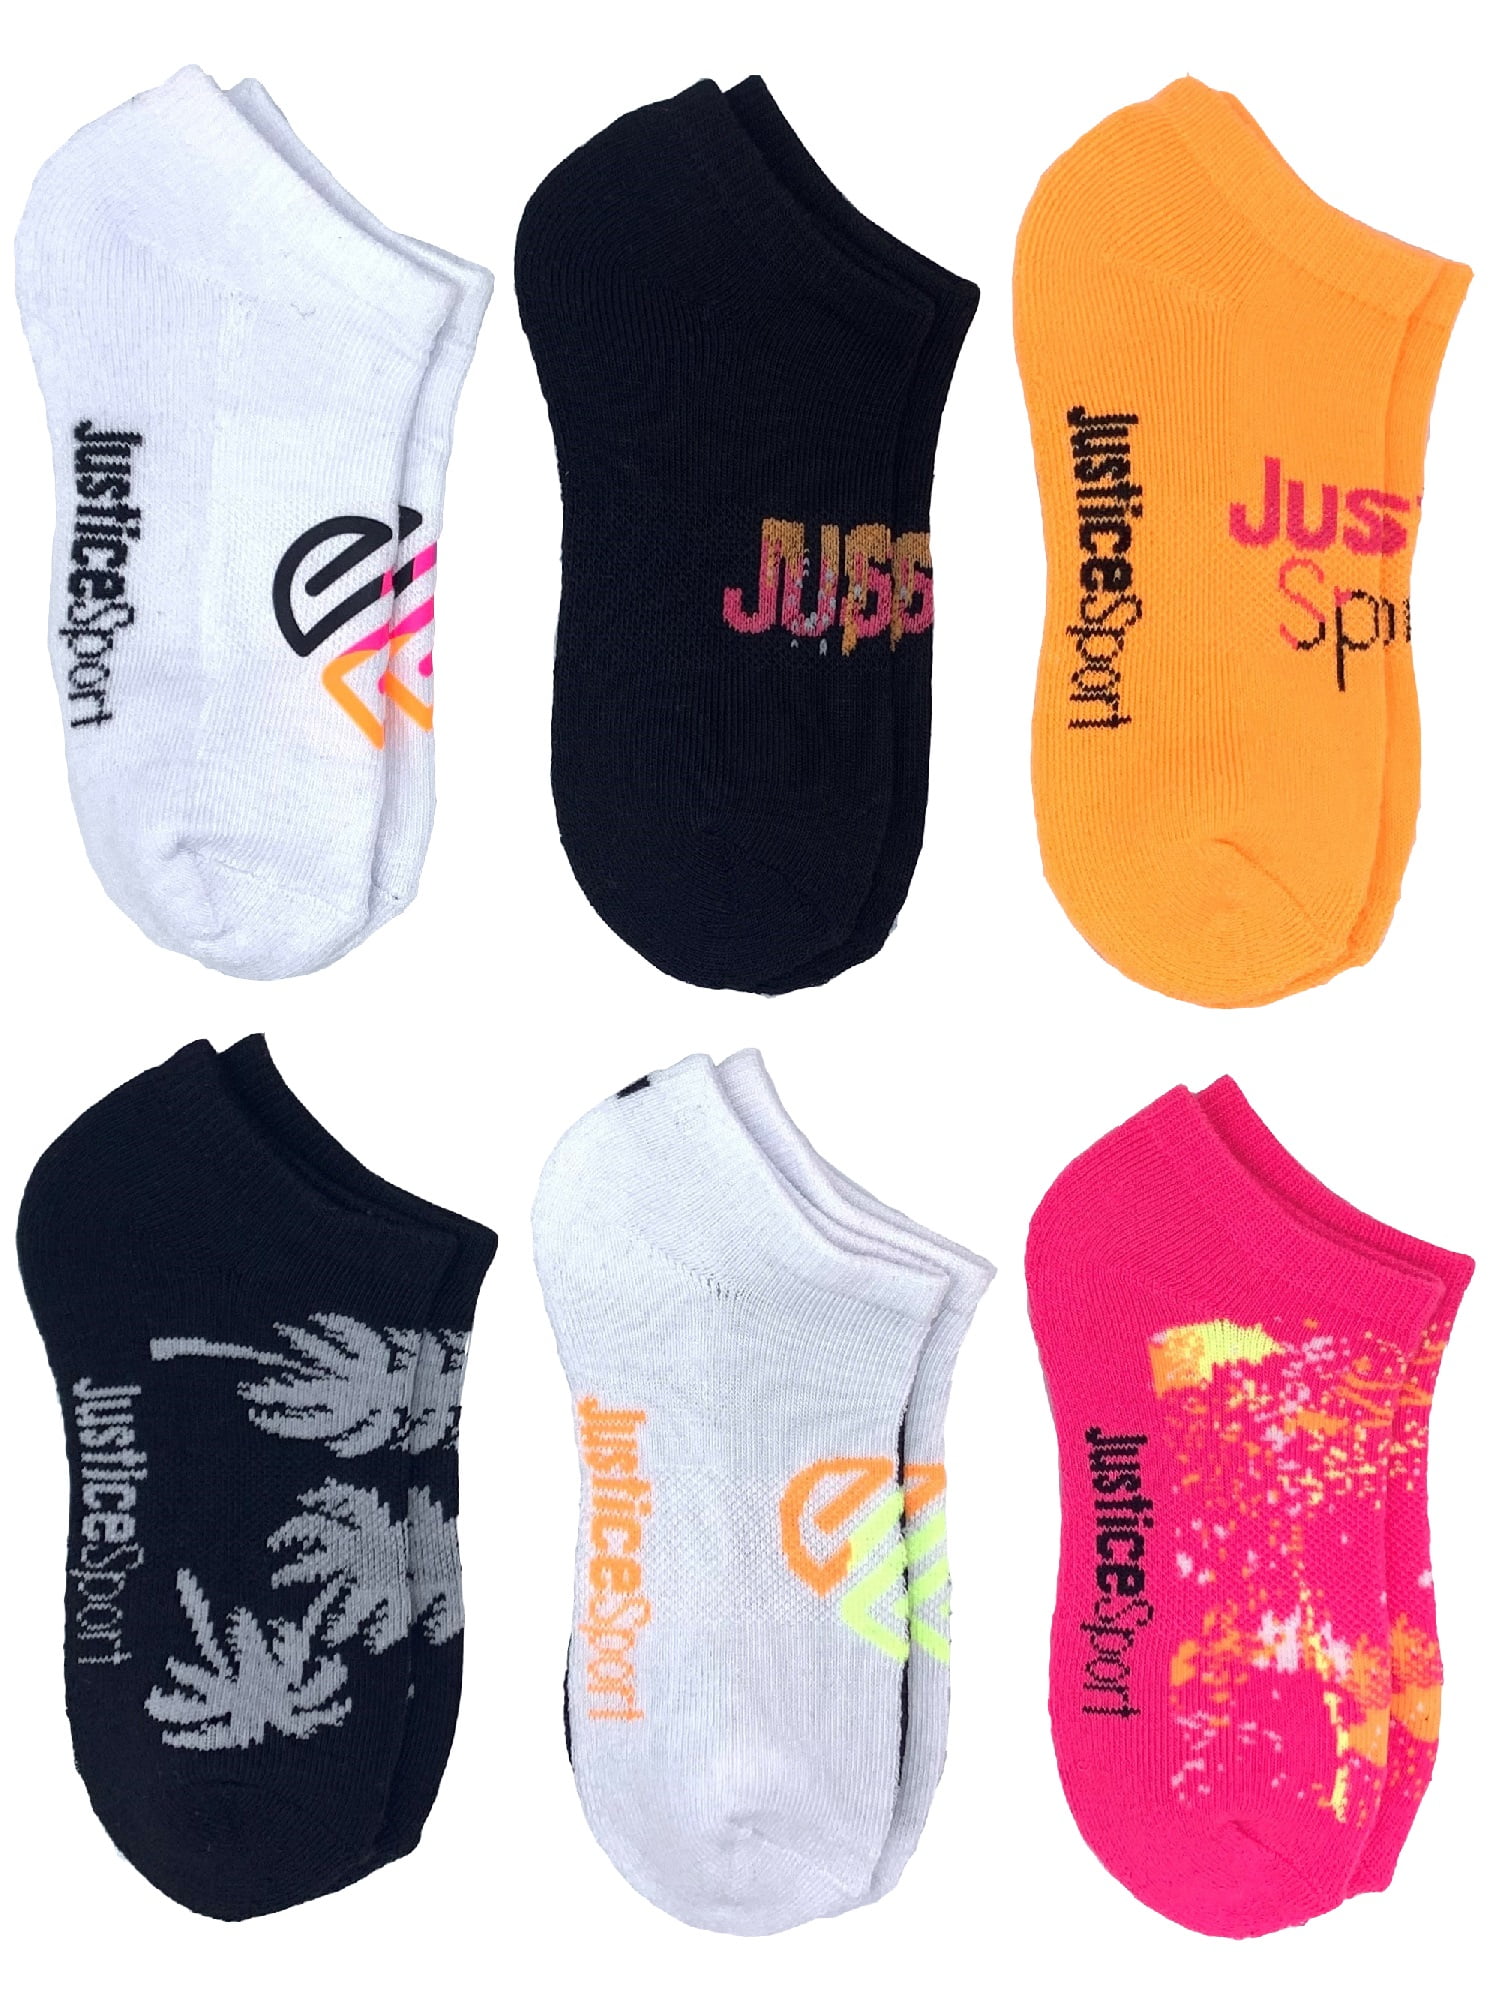 Justice, Girls No-Show Socks, 6-Pack, Sizes M-L